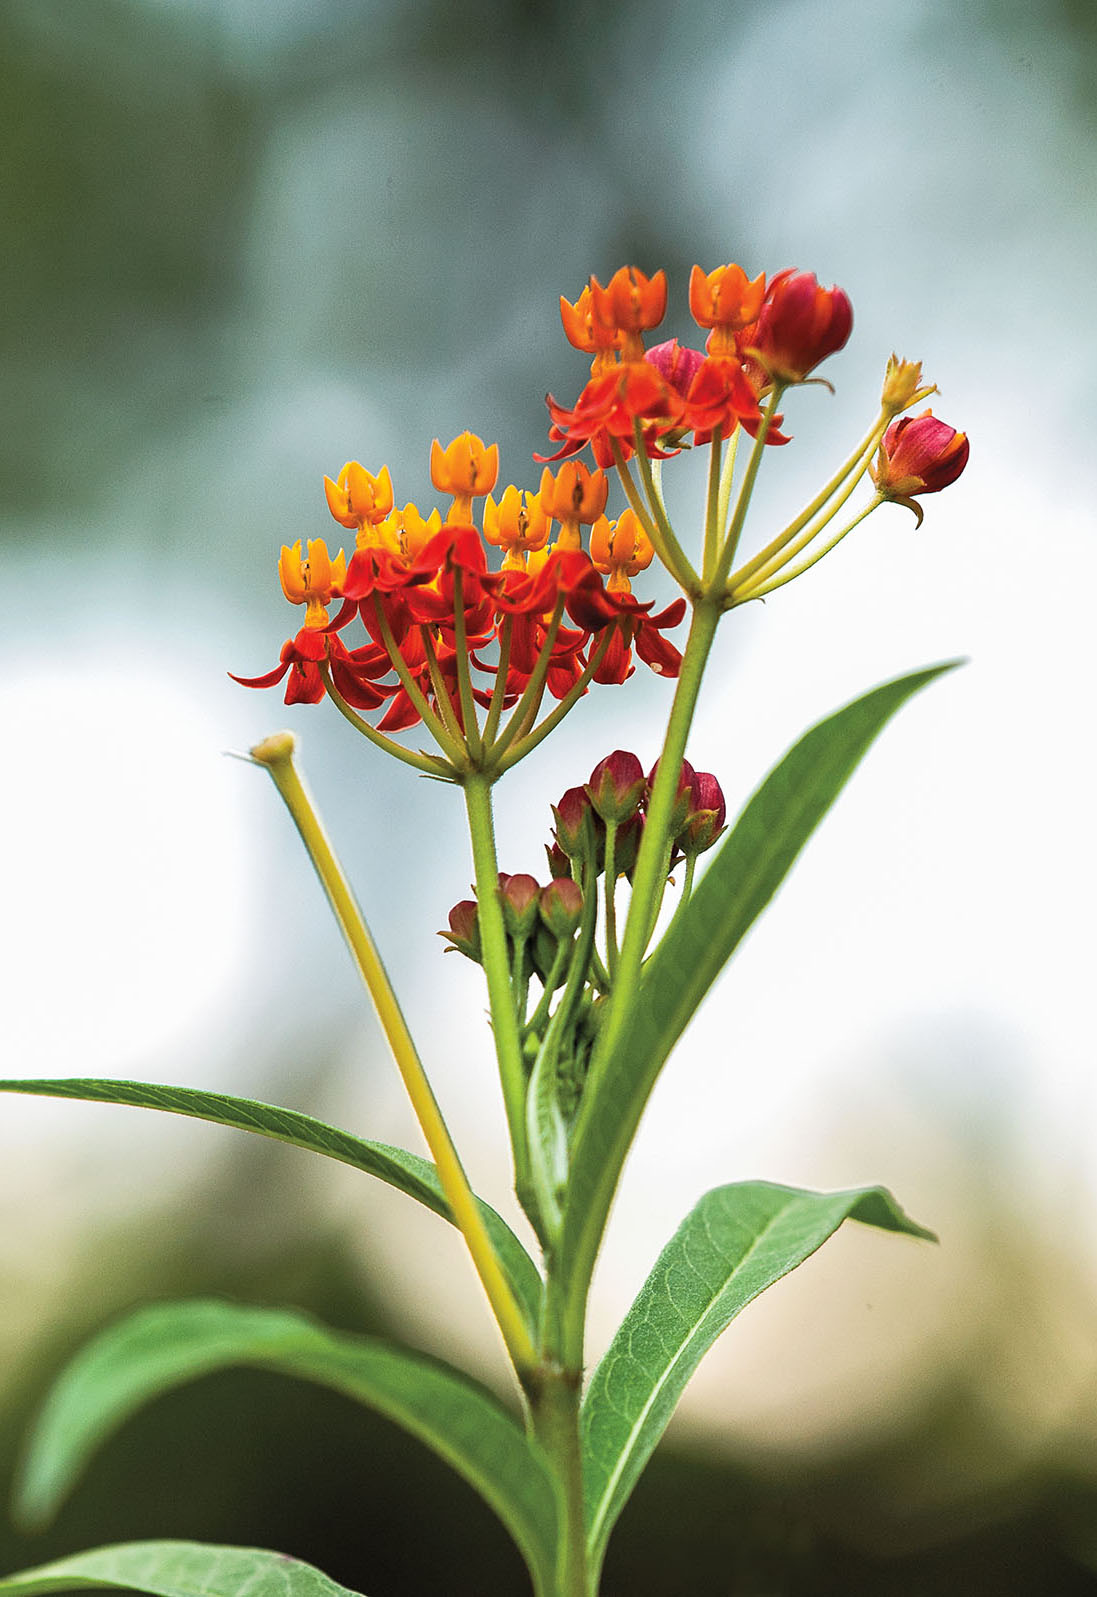 A small, bright red flower on a vivid green stem